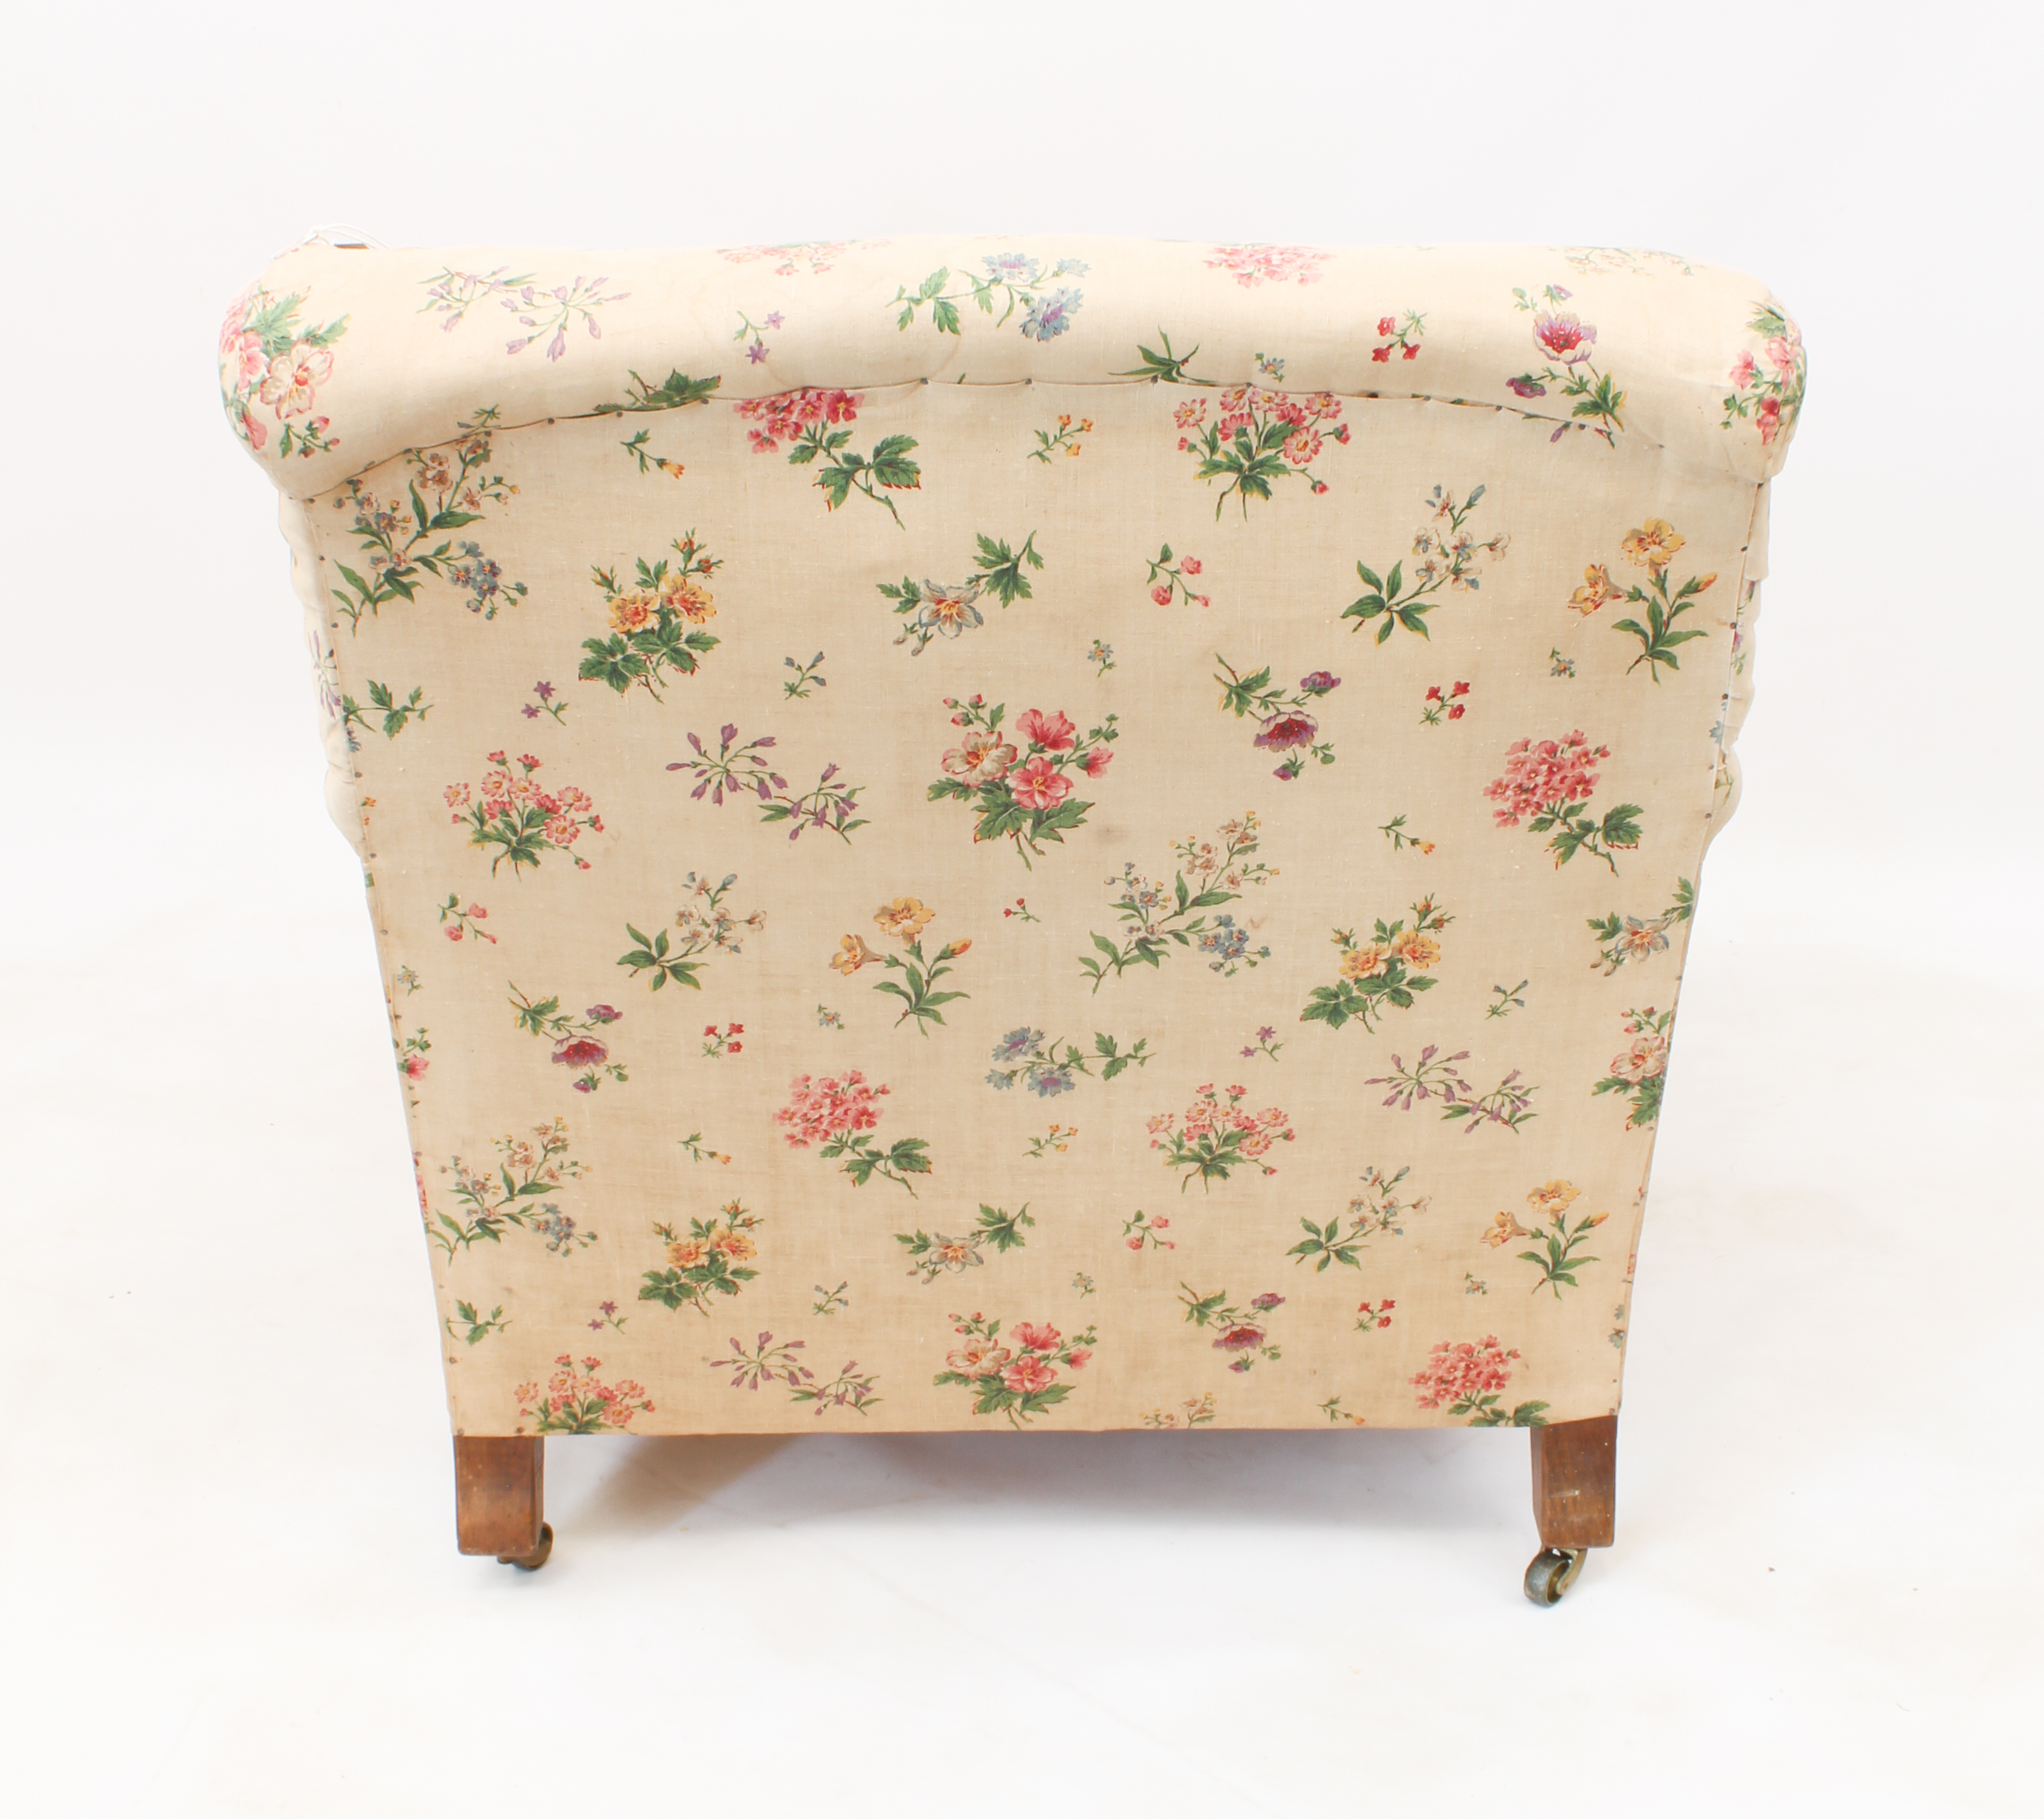 An early 20th century armchair by Howard & Sons - upholstered in early 20th century printed floral - Image 4 of 16